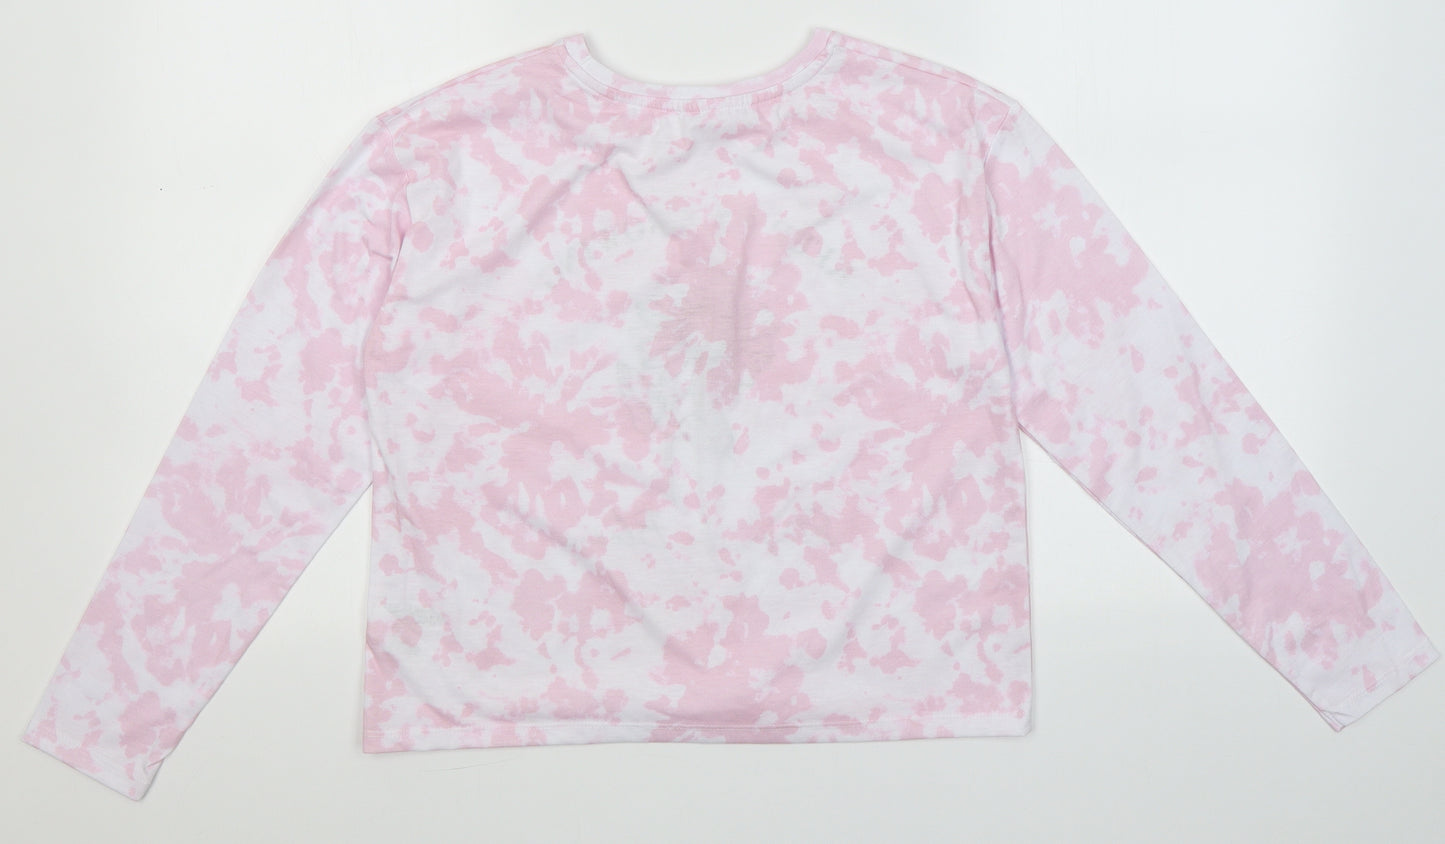 Dunnes Stores Girls Pink Spotted Polyester Top Pyjama Top Size 11-12 Years   - Keep on growing. Stay in bloom